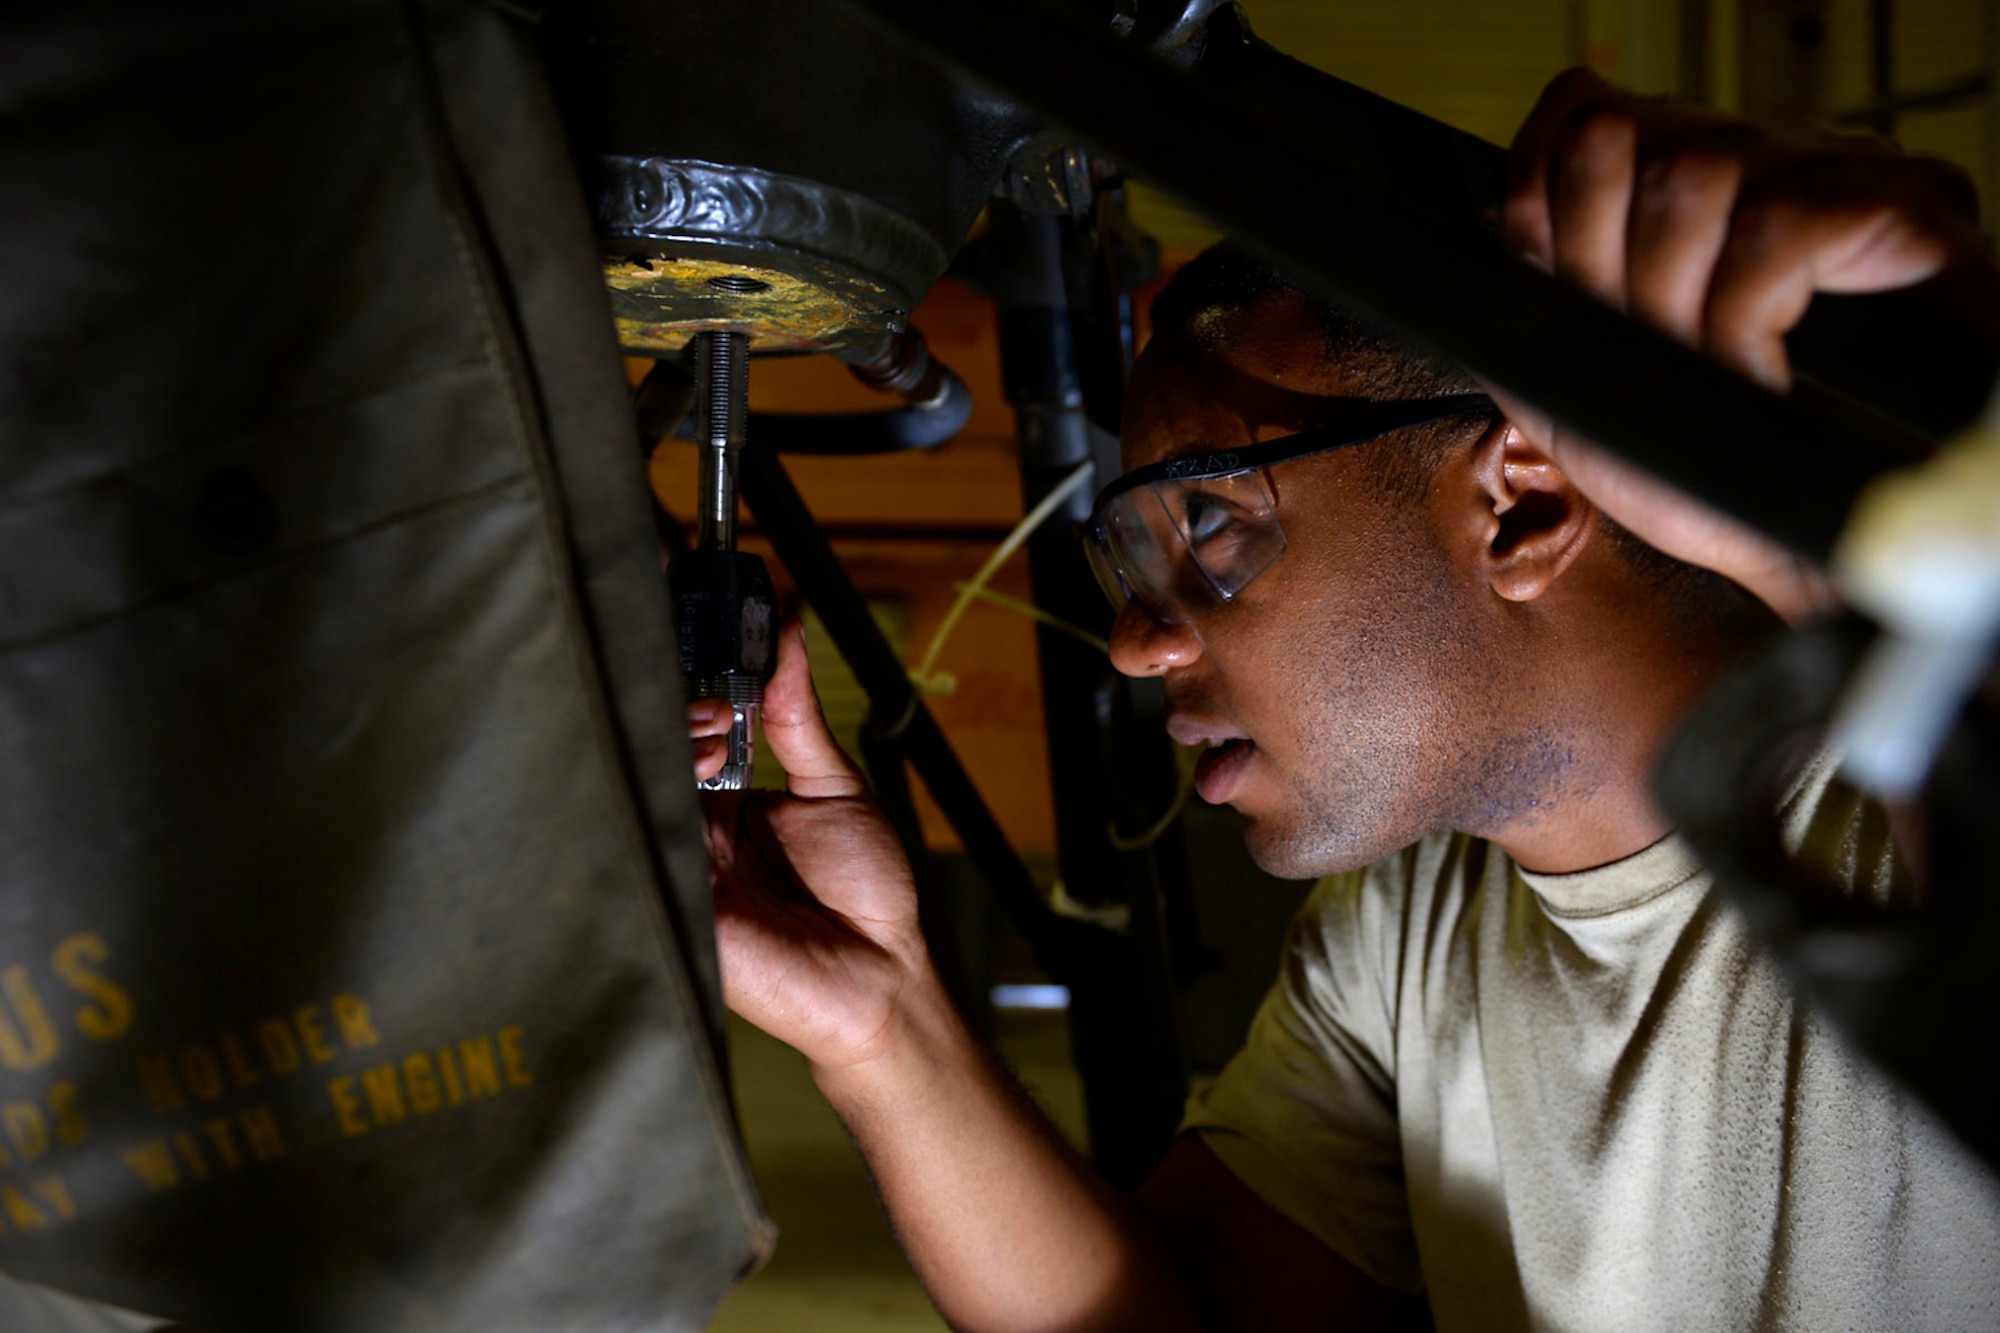 Airman 1st Class Dawuud Gibson, aerospace ground equipment journeyman and deployed member of the 36th Maintenance Squadron, adjusts a screw on an aircraft tripod jack Aug. 12, 2015, at Andersen Air Force Base, Guam. The AGE maintainers care for a variety of essential equipment used during aircraft maintenance and preflight operations. (U.S. Air Force photo by Staff Sgt. Alexander W. Riedel/Released)  